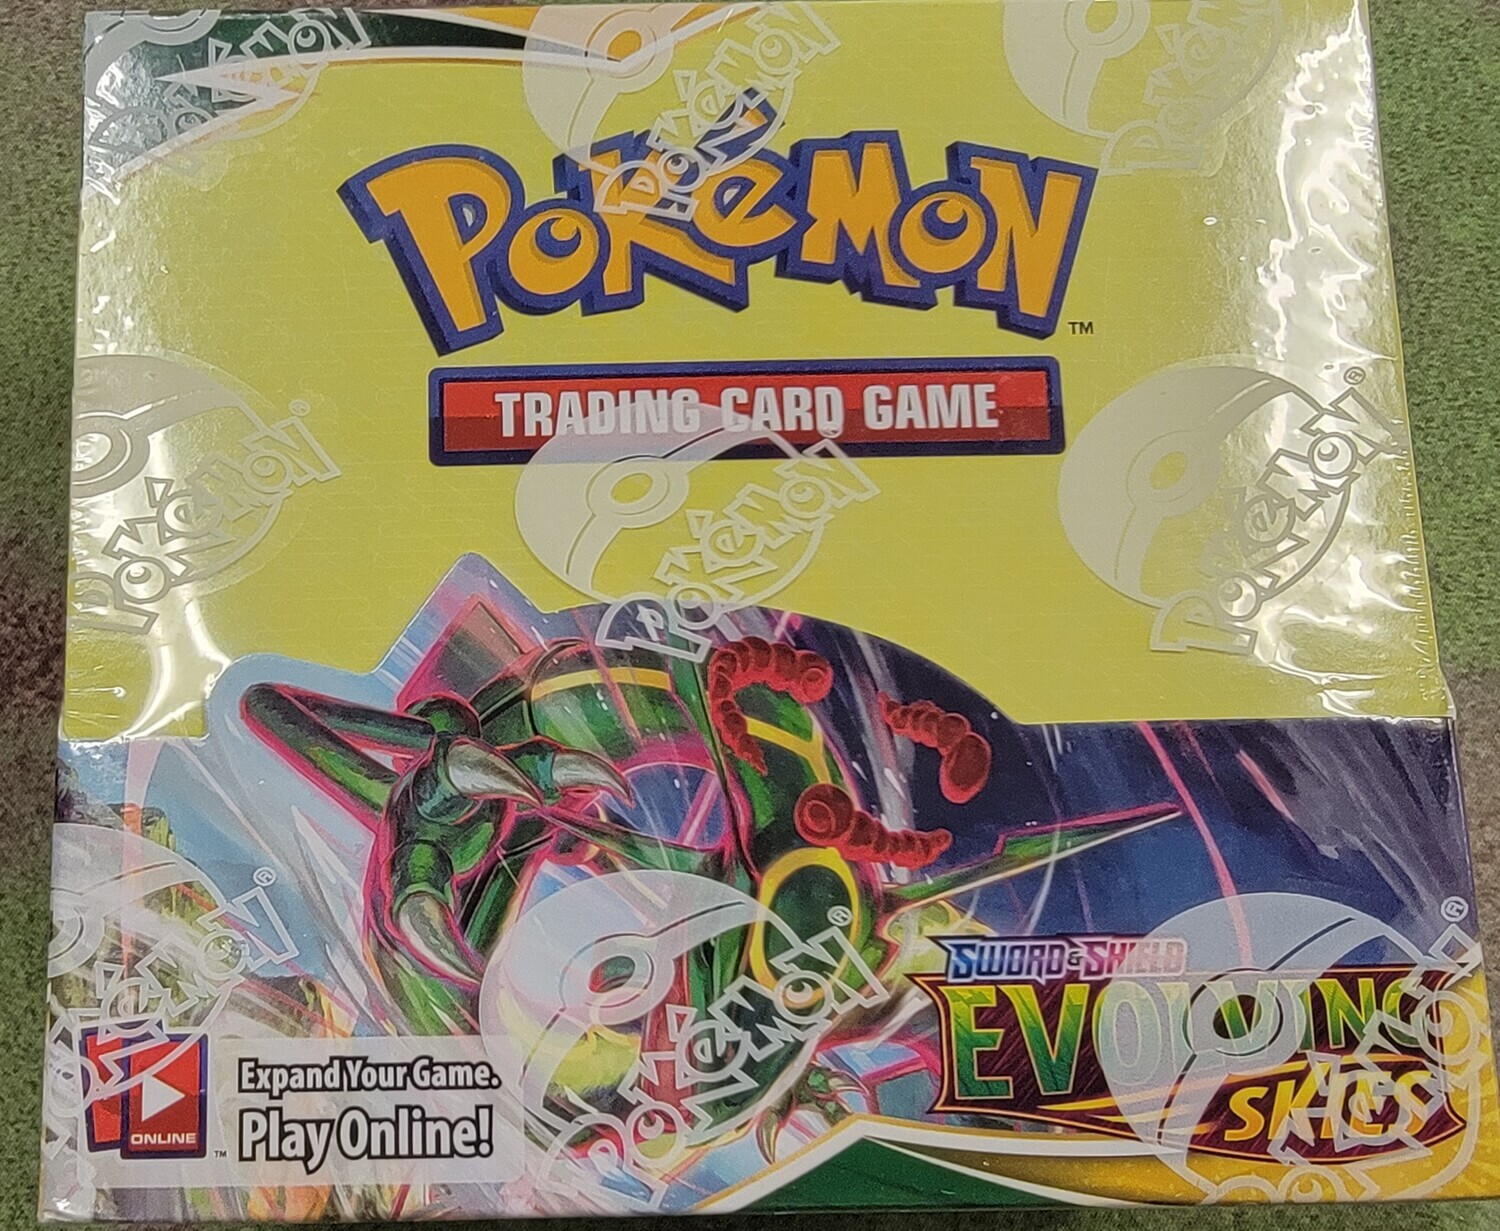 Pokemon: Sword and Shield- Evolving Skies Booster - 10 Cards per pack